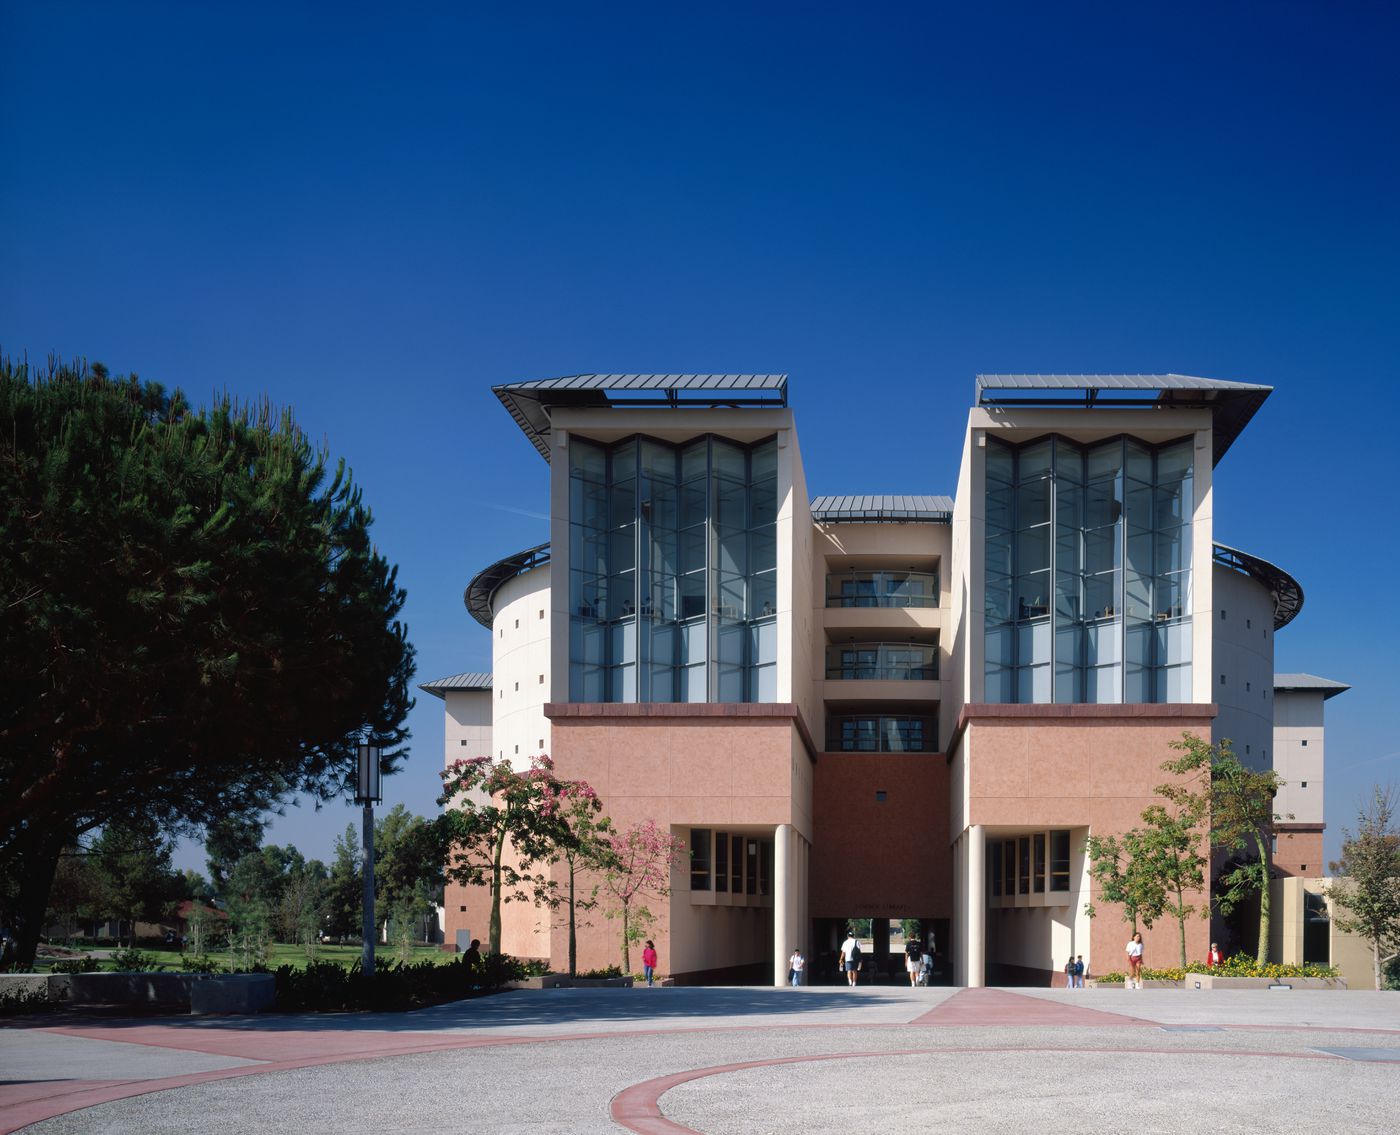 Science Library, University of California at Irvine, California: exterior view